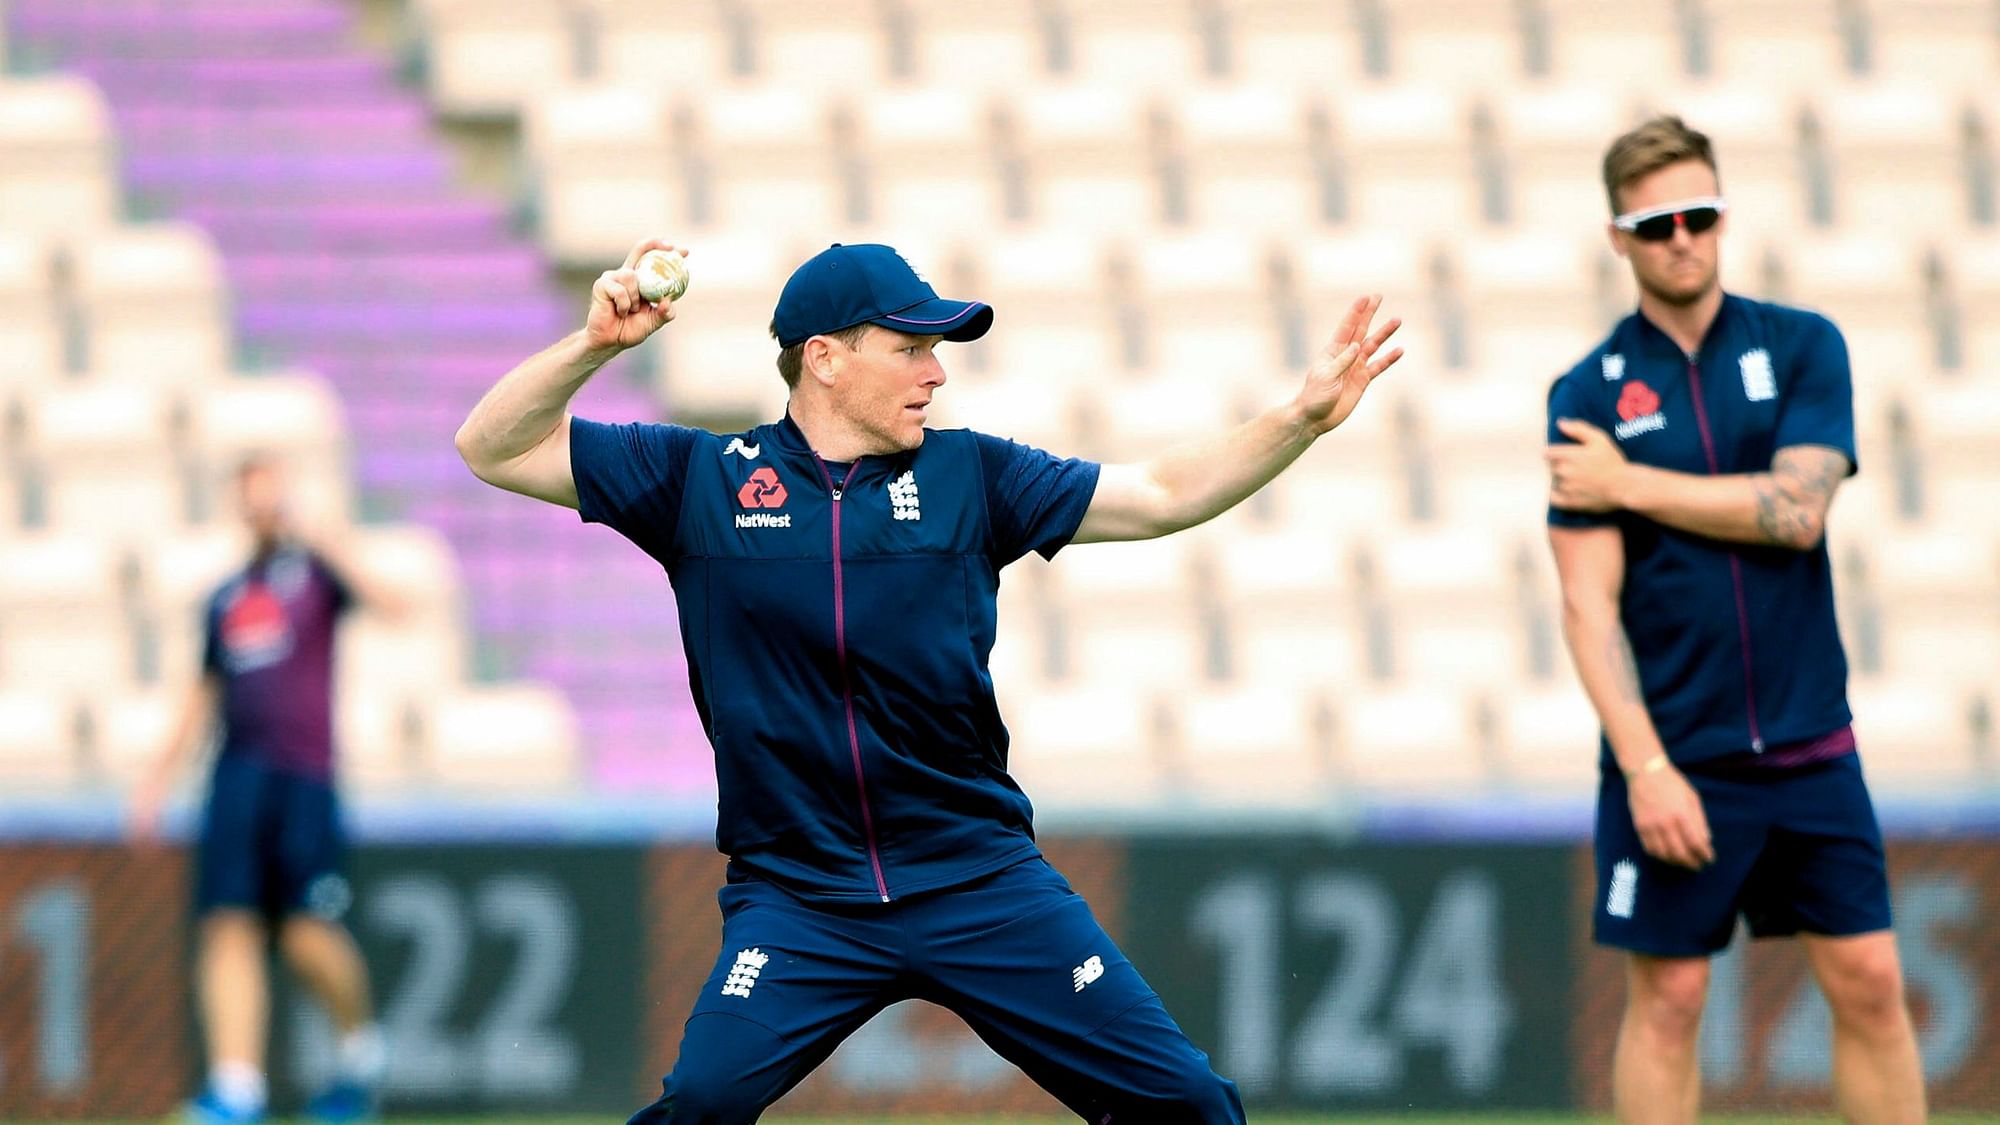 The ECB named a group of 55 men’s players who have been asked to return to training.